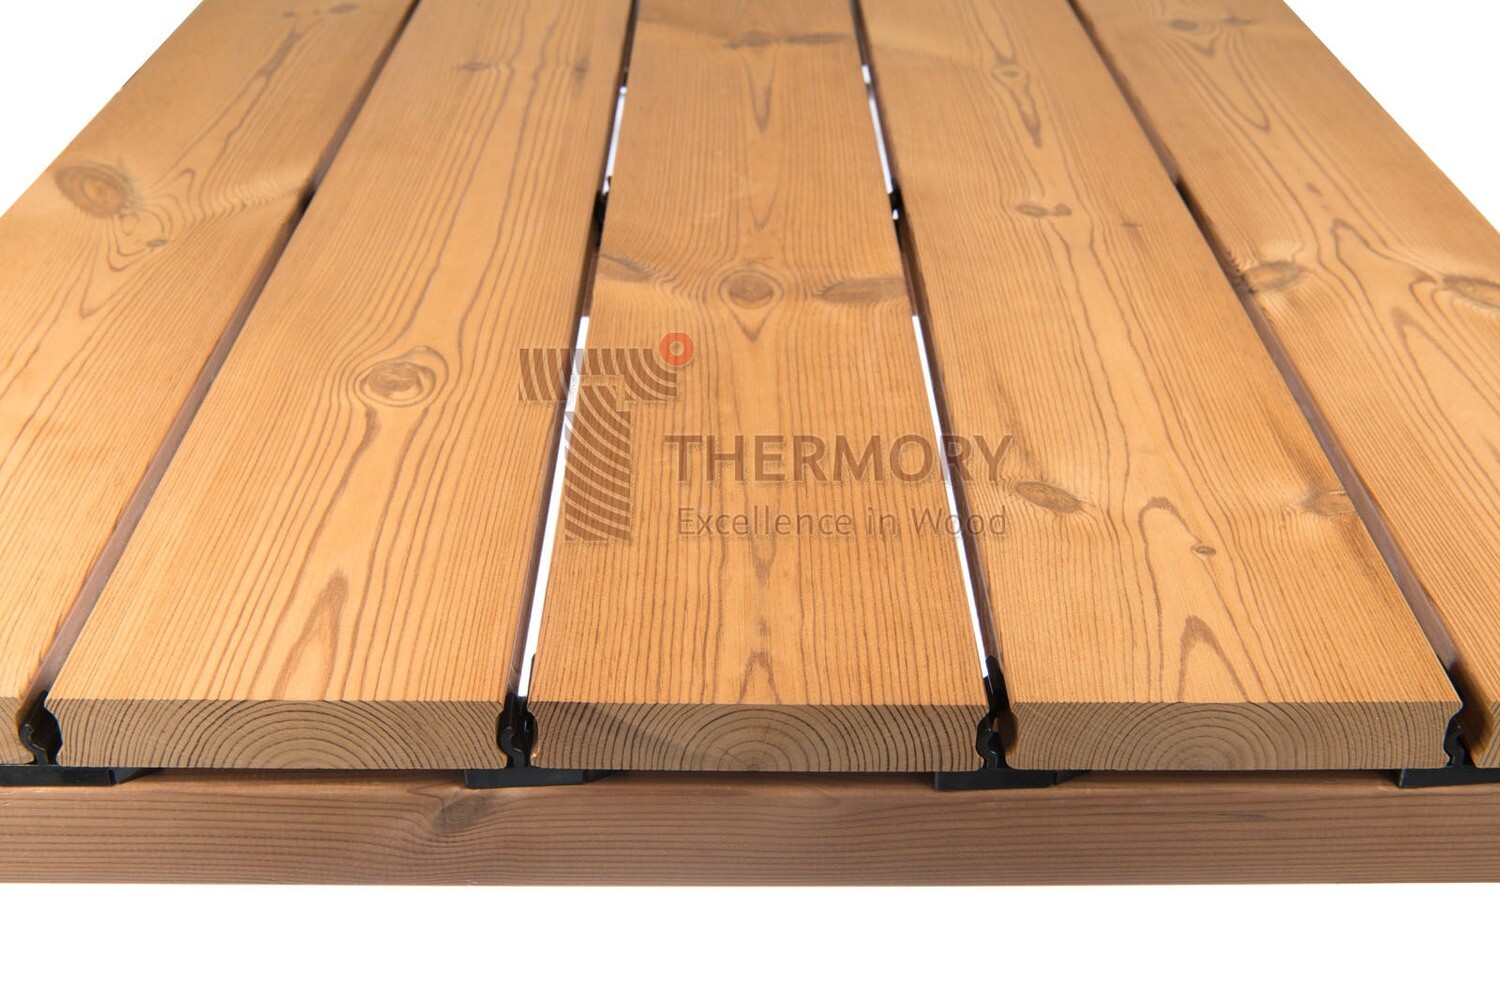 Thermory Pine Decking 26 x 140mm x 4.8m